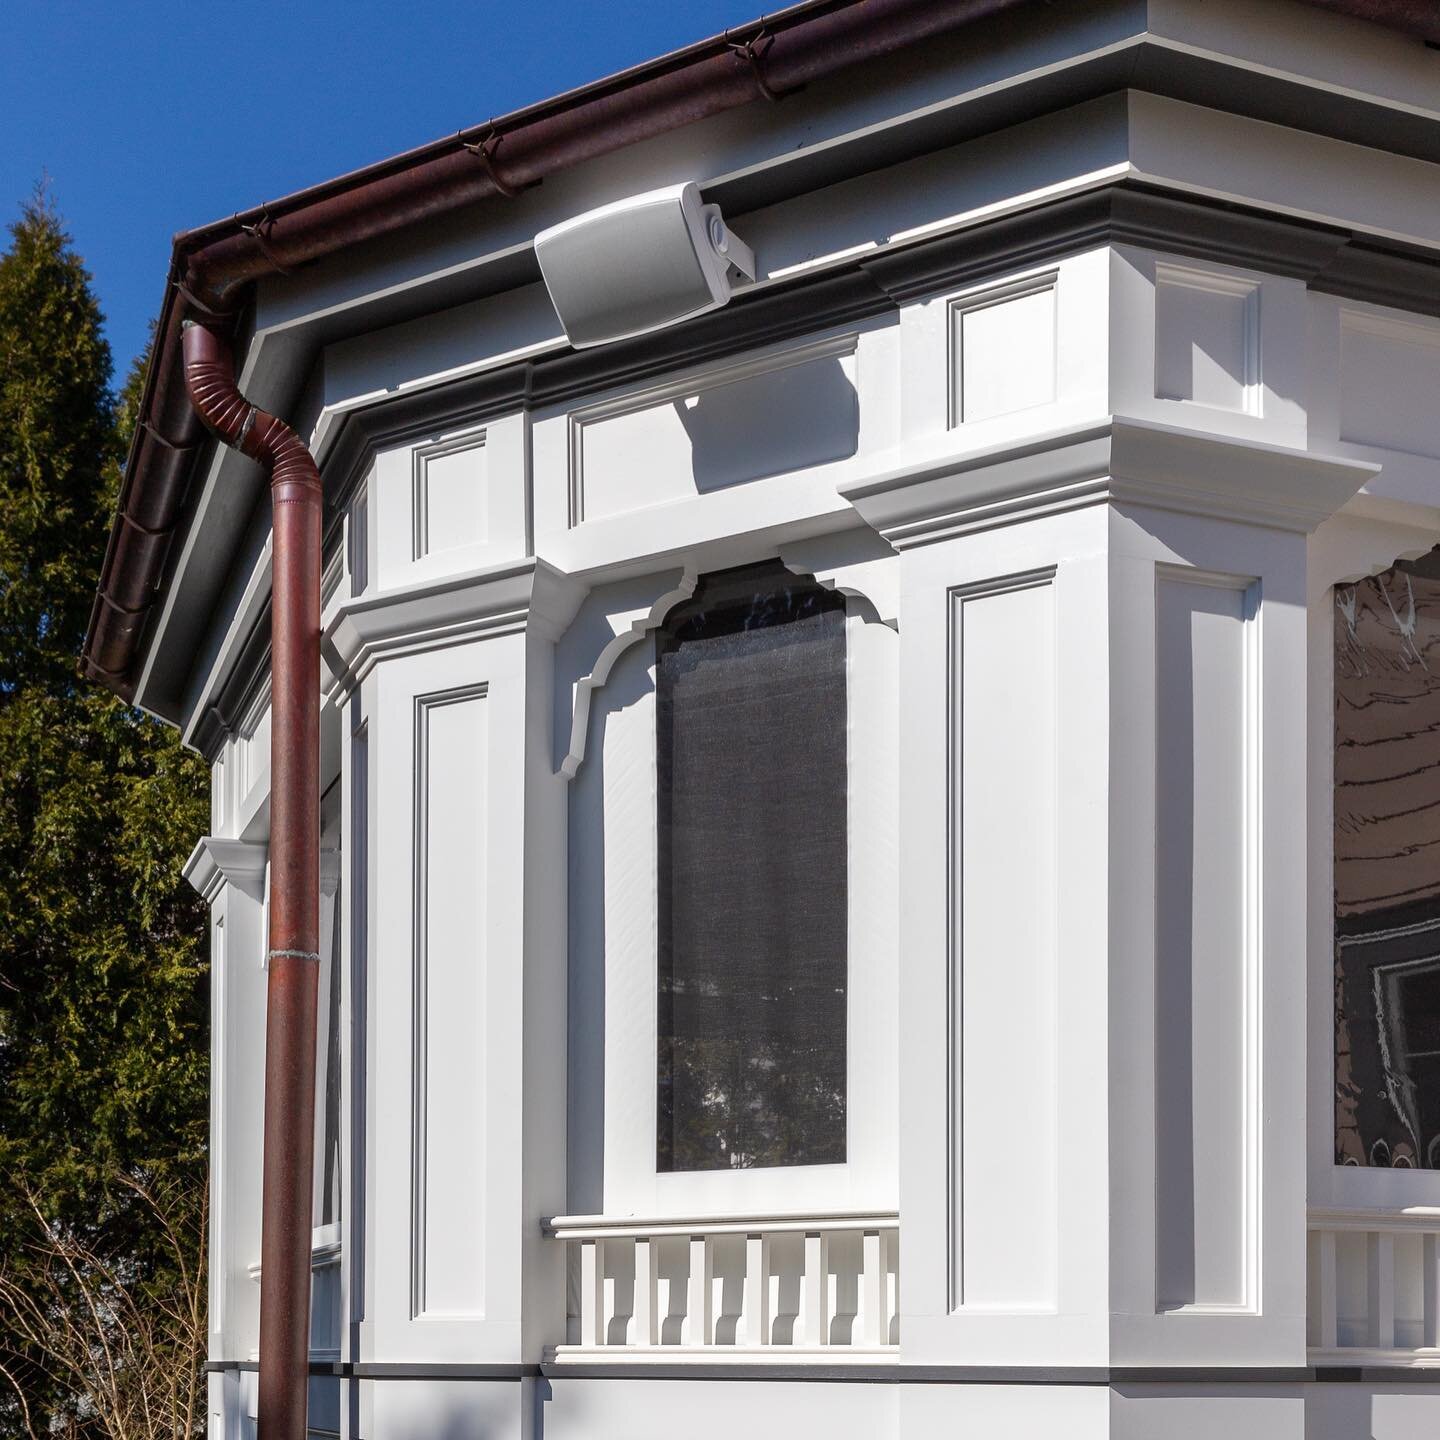 Check out the stunning and intricate crisp white trim details on this Victorian screened in porch. Retractible vinyl windows keep the warmth in when needed and the pollen out. Top quality construction by @mjscontractingcorp materials supplied by @int